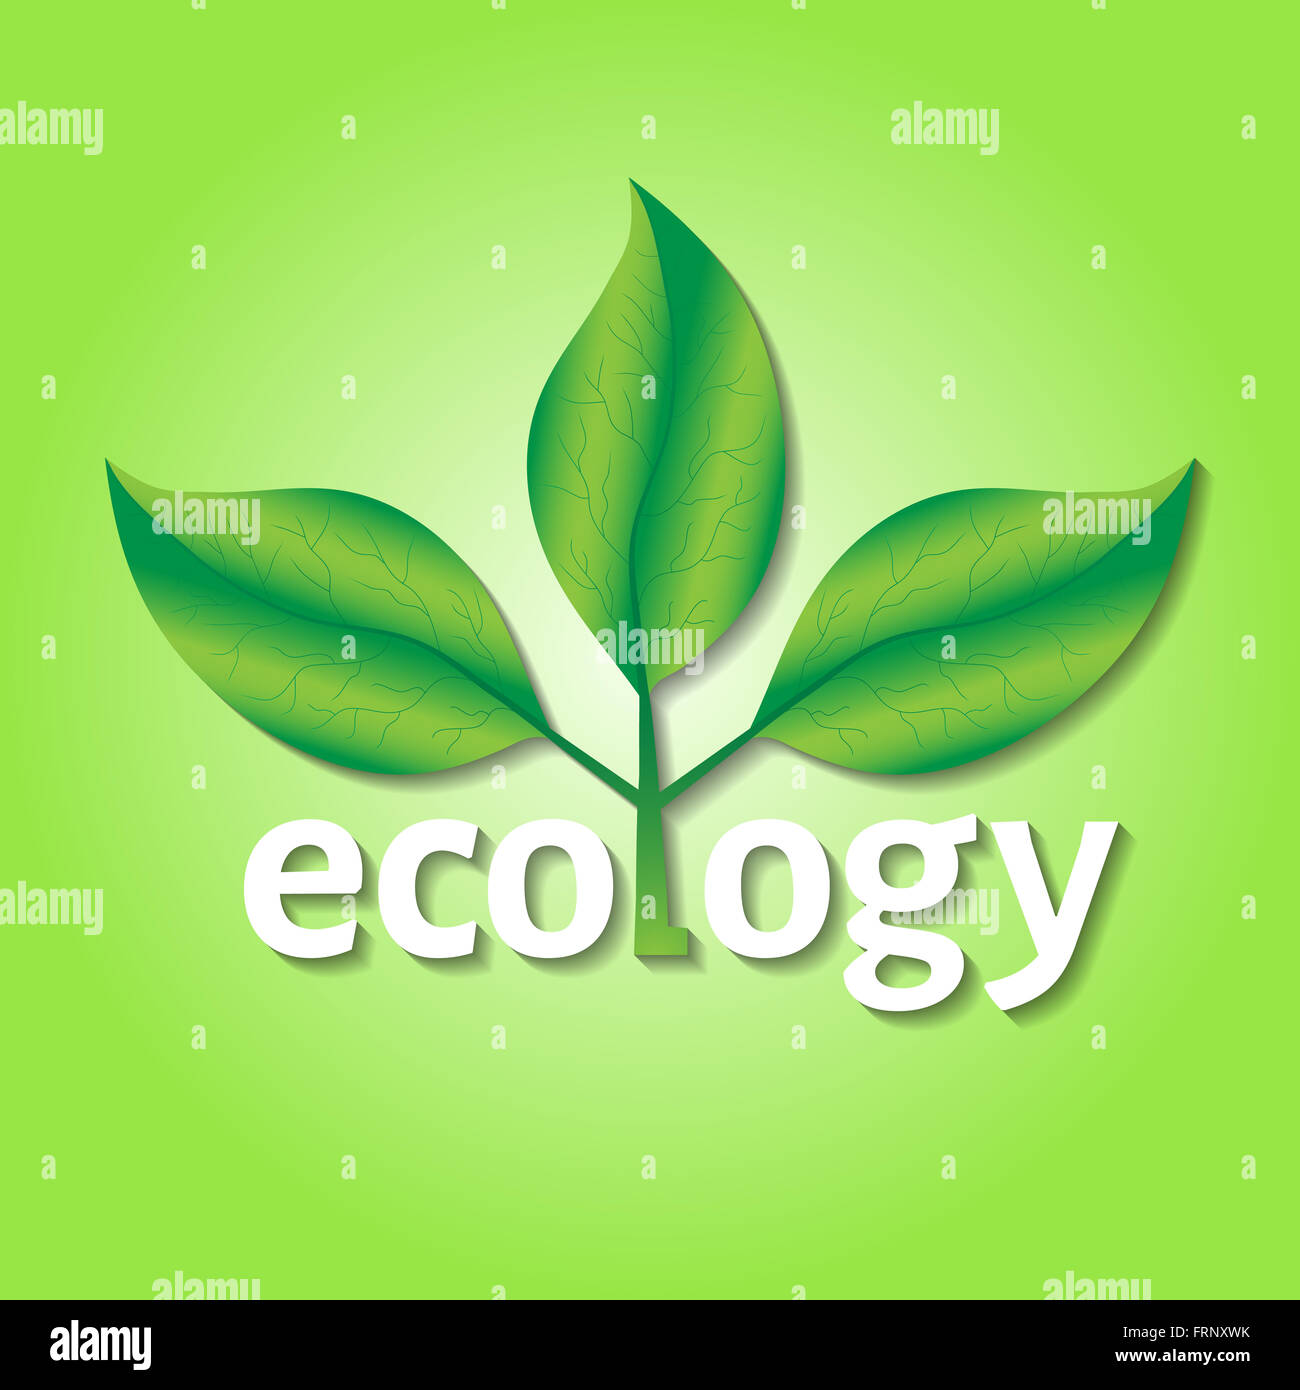 Ecological or environmental concept or logo. Green leaves on a tree with ecology white text on a green background. Stock Photo